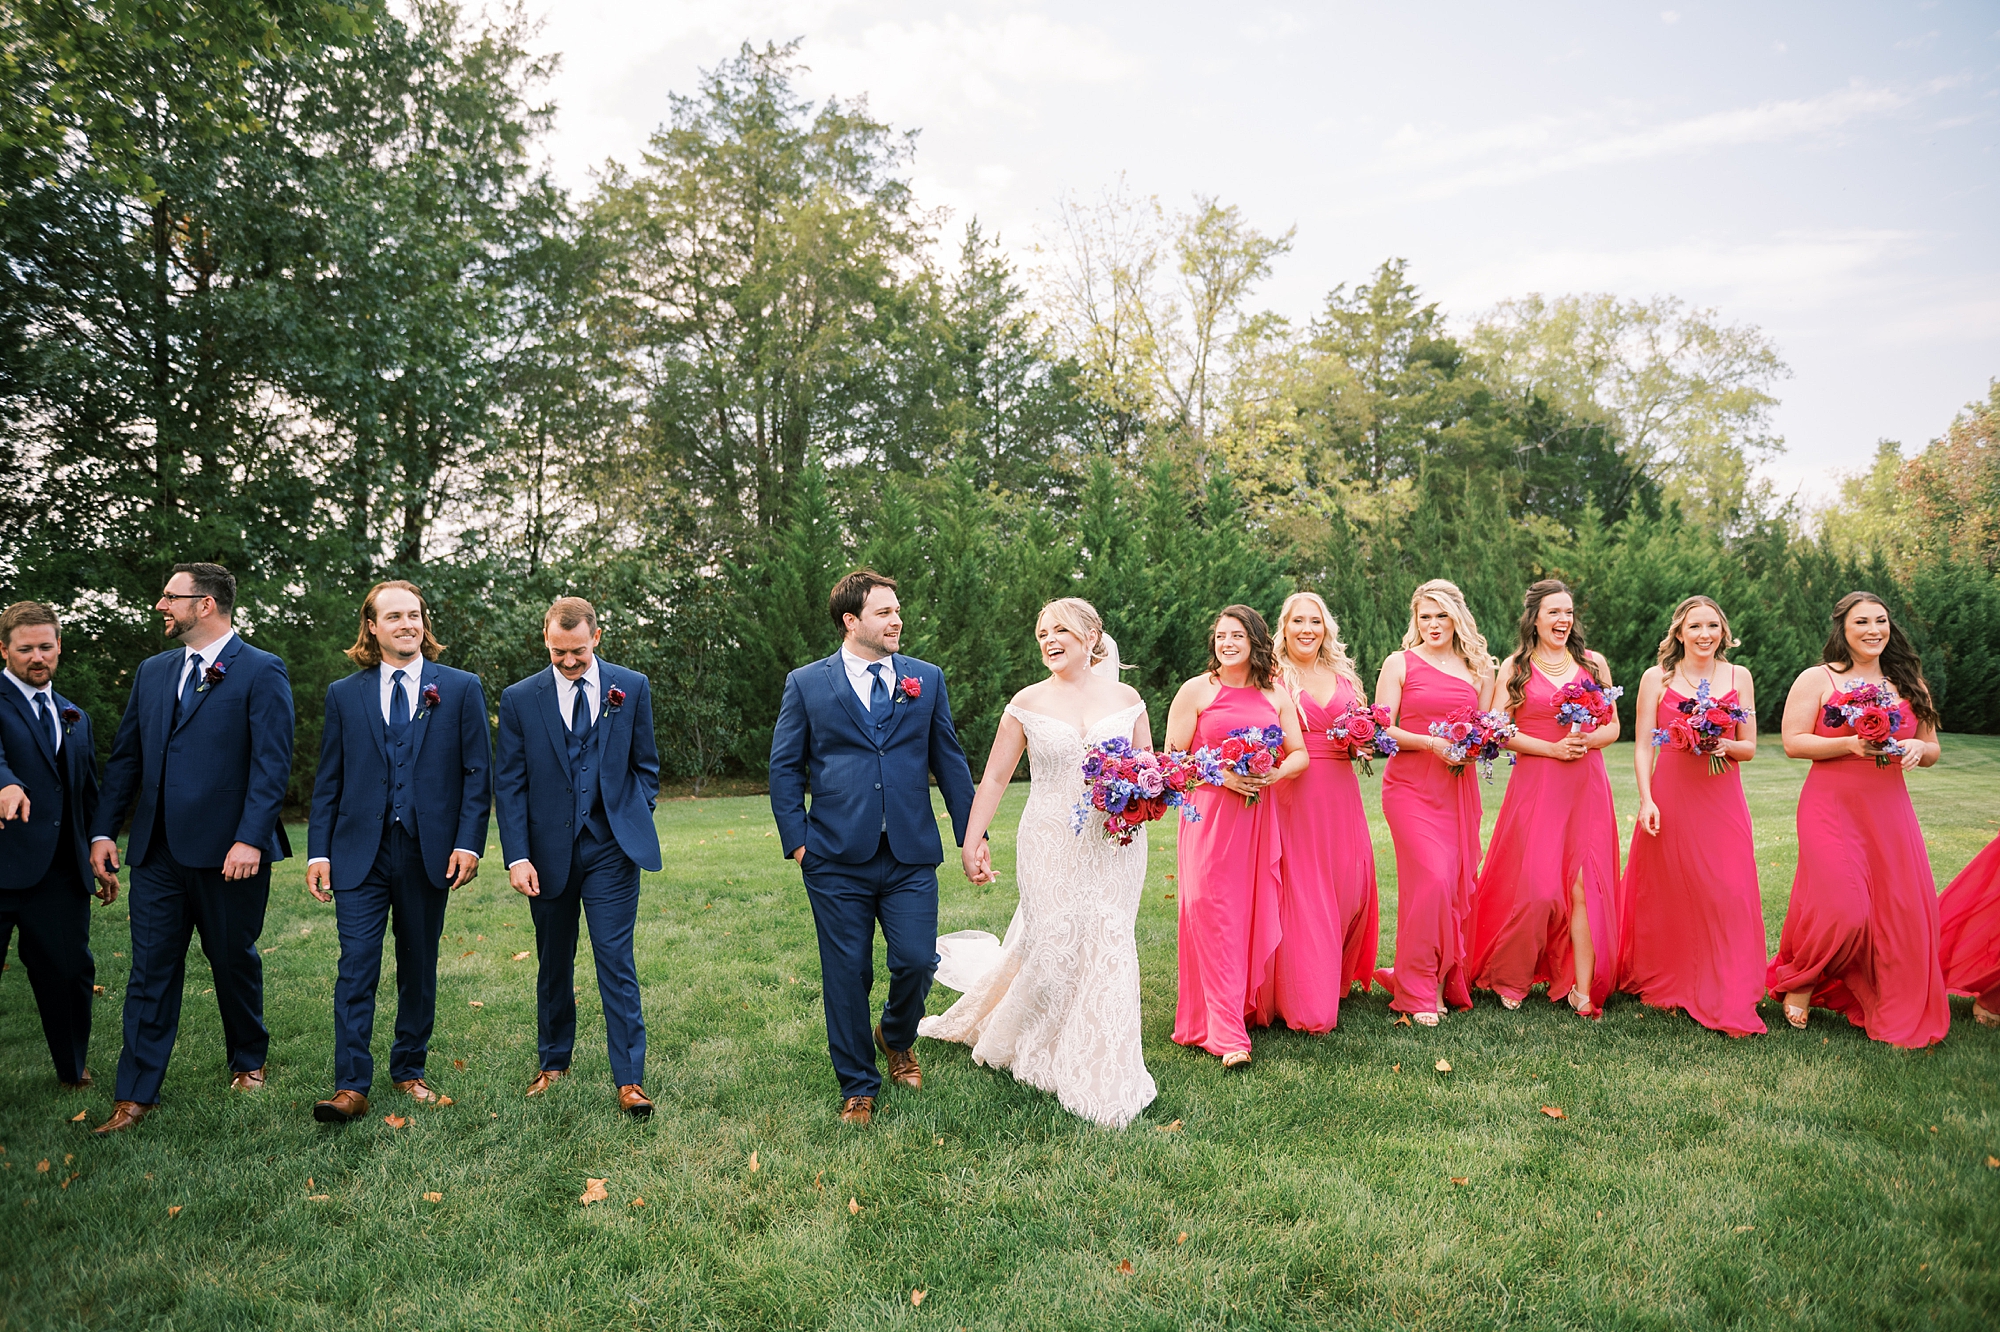 couple walk together with bridal party